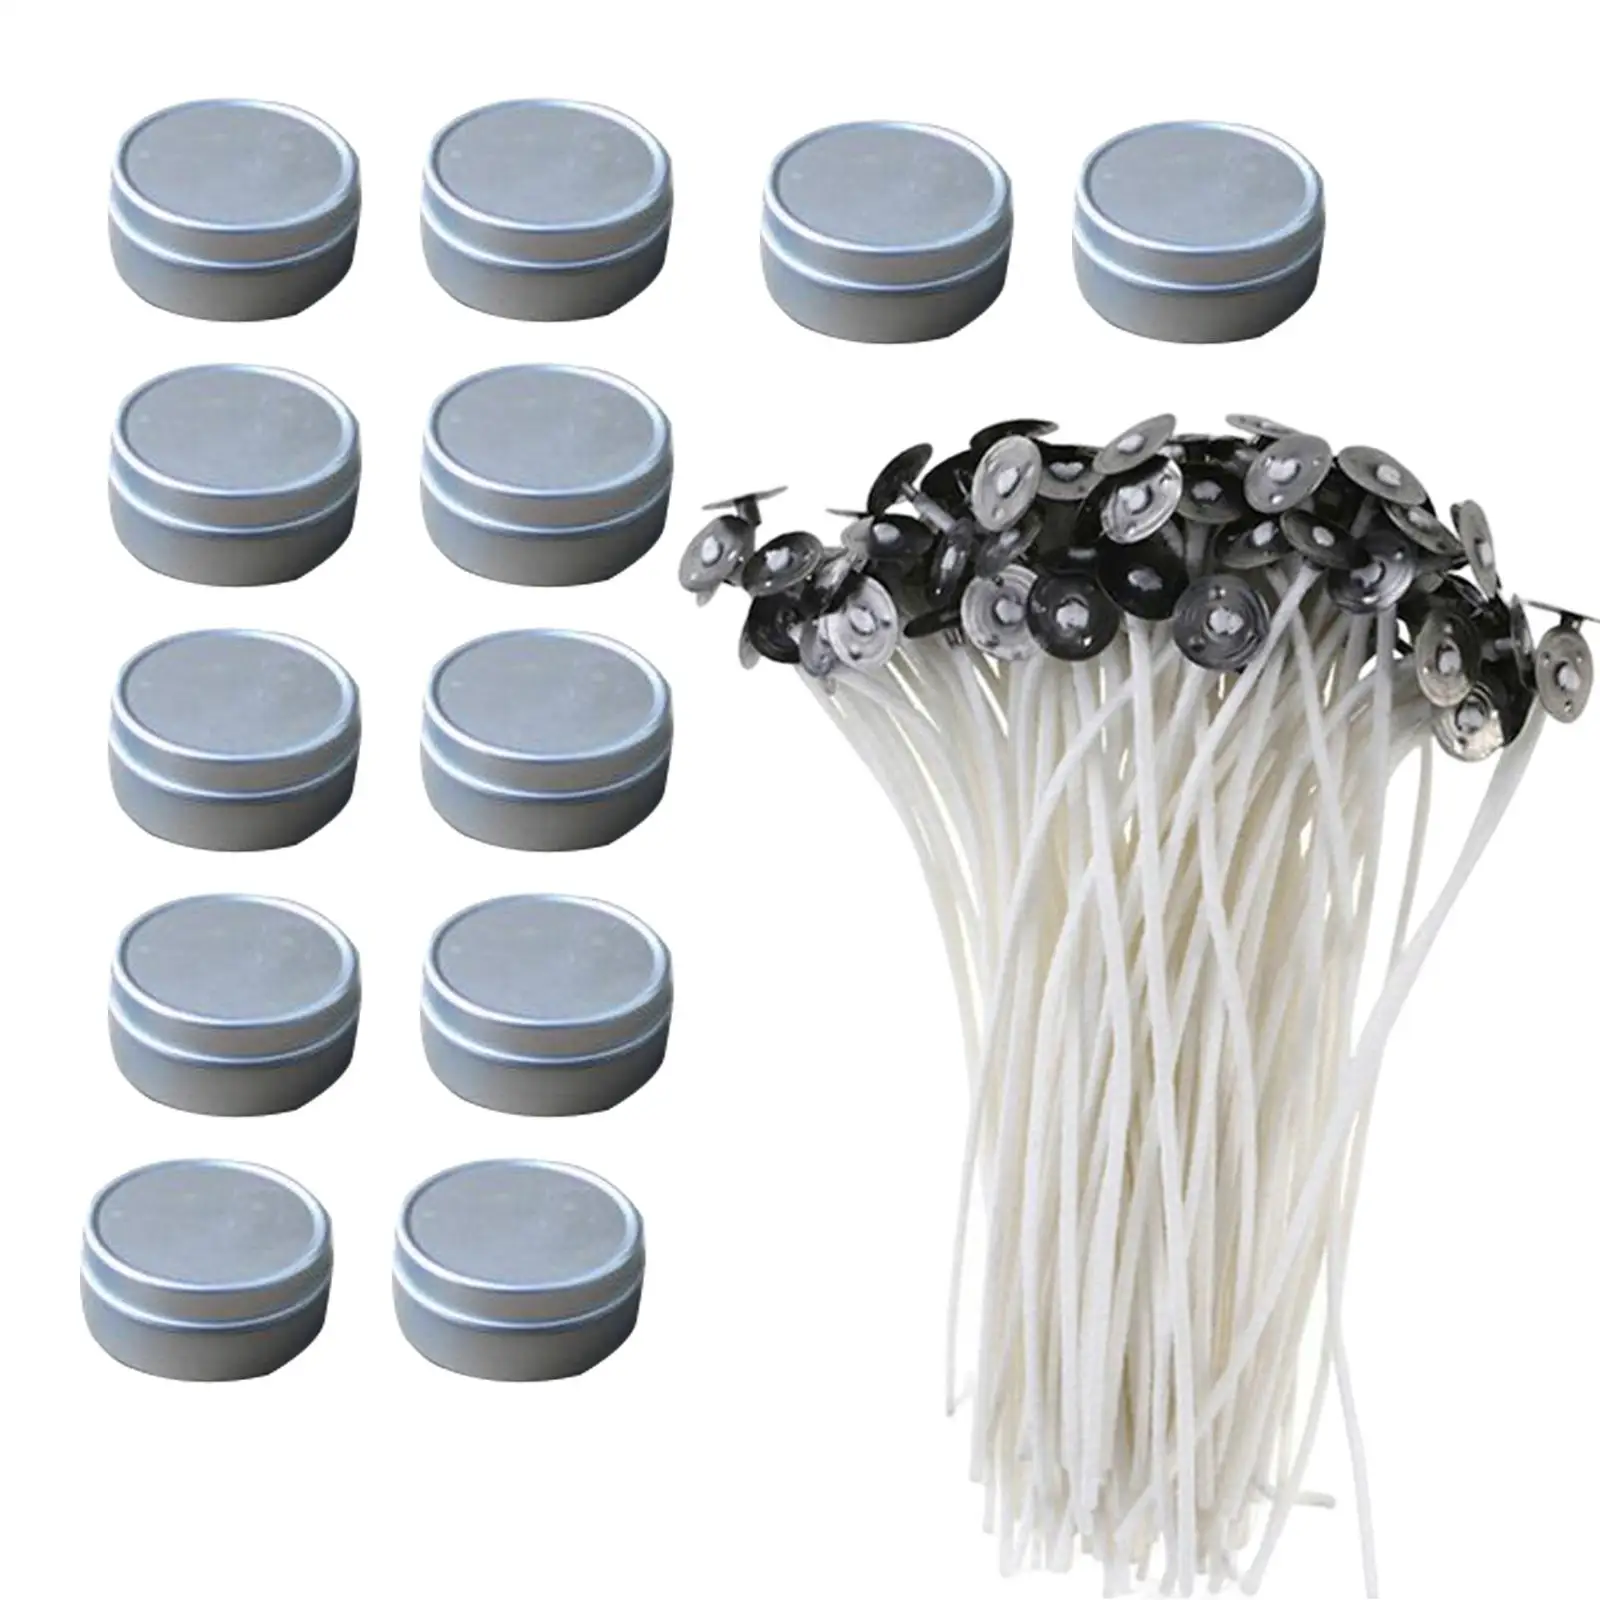 100x Candle Wicks Storage Box Candle DIY Pretabbed Wicks with 12x Empty Candle Tins for Candle Making